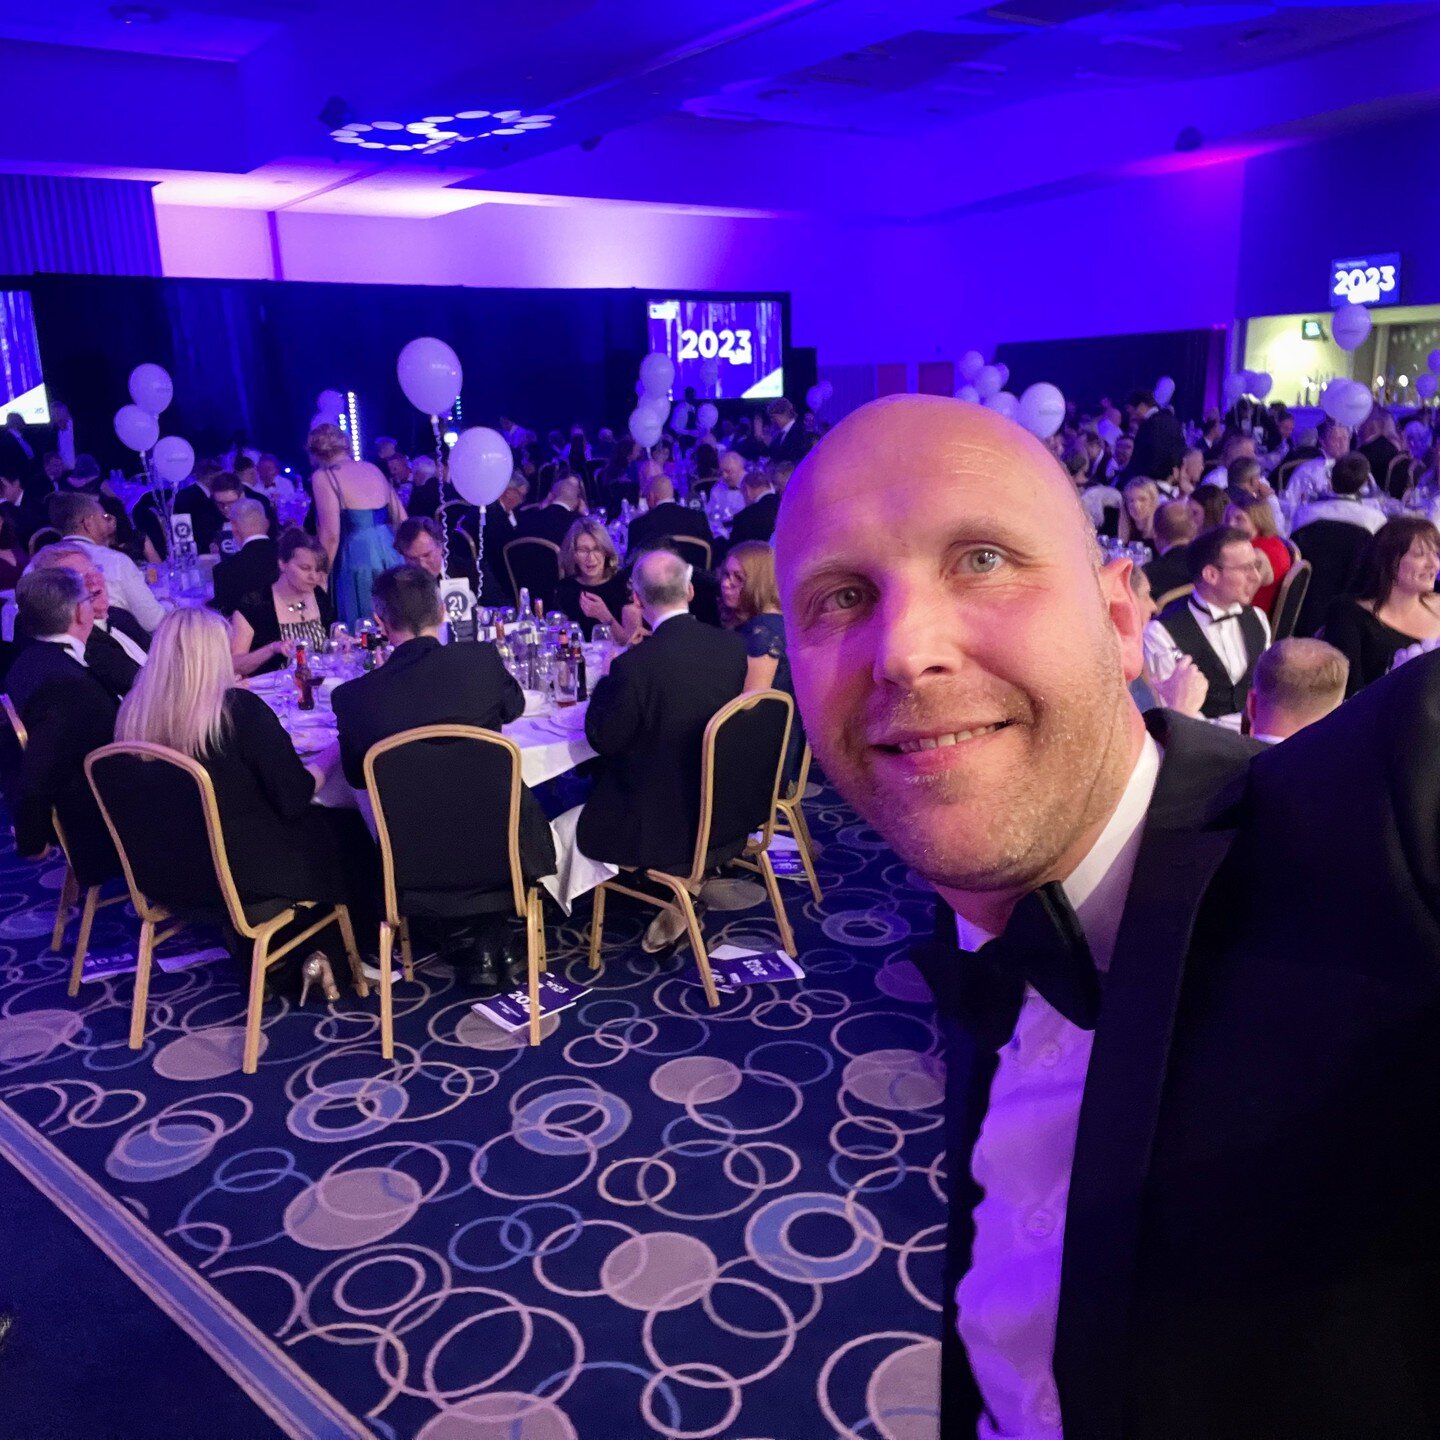 Quick shot from Constructing Excellence West Midlands awards last night...
Thanks @ballandberry for hosting us. CoARC Limited #cewmawards2023 #constructingexcellence